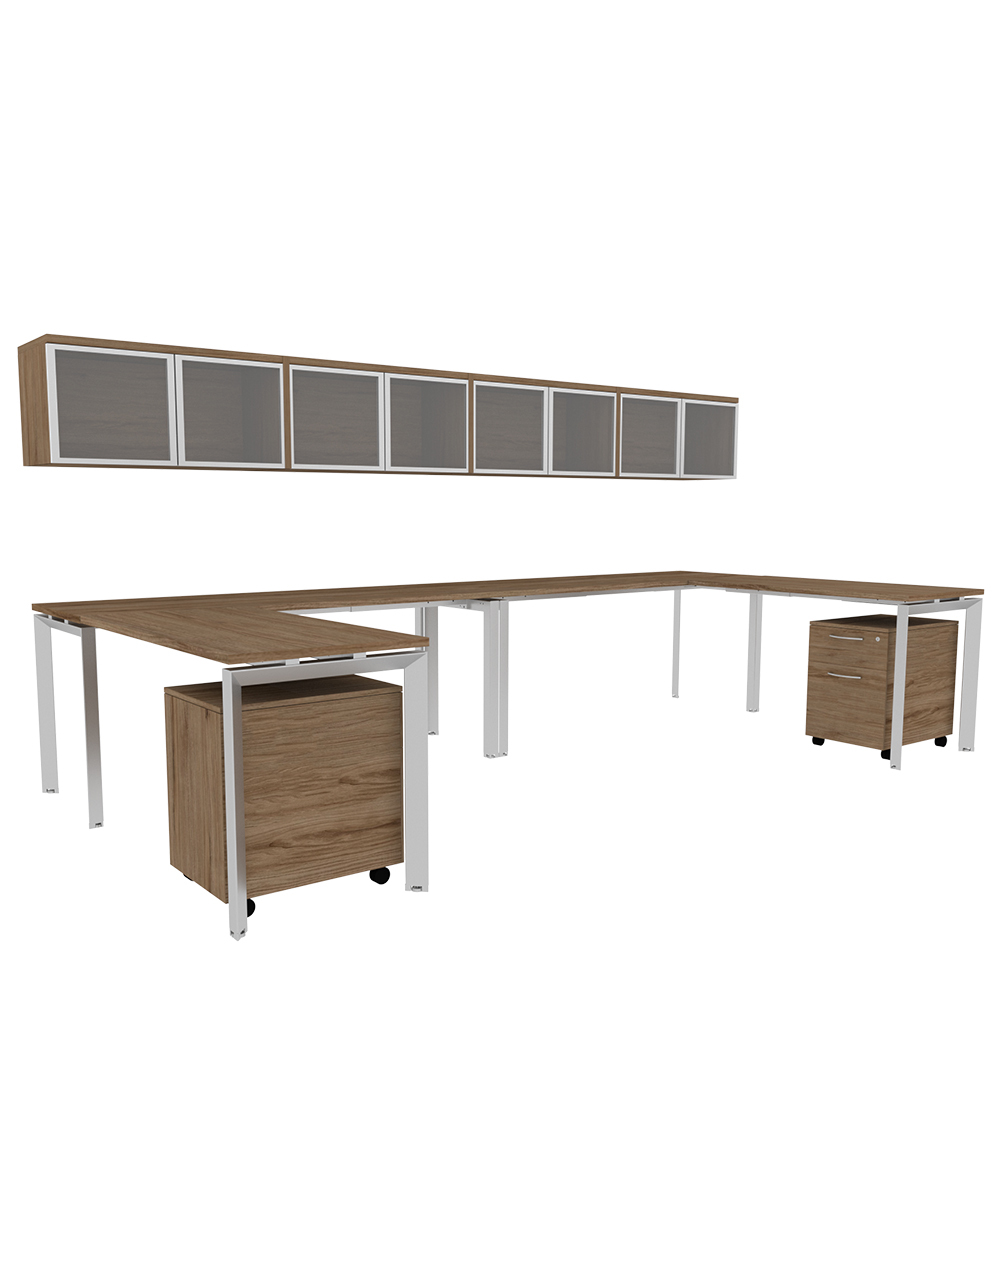 DOUBLE L-SHAPED WORK STATION with pedestals